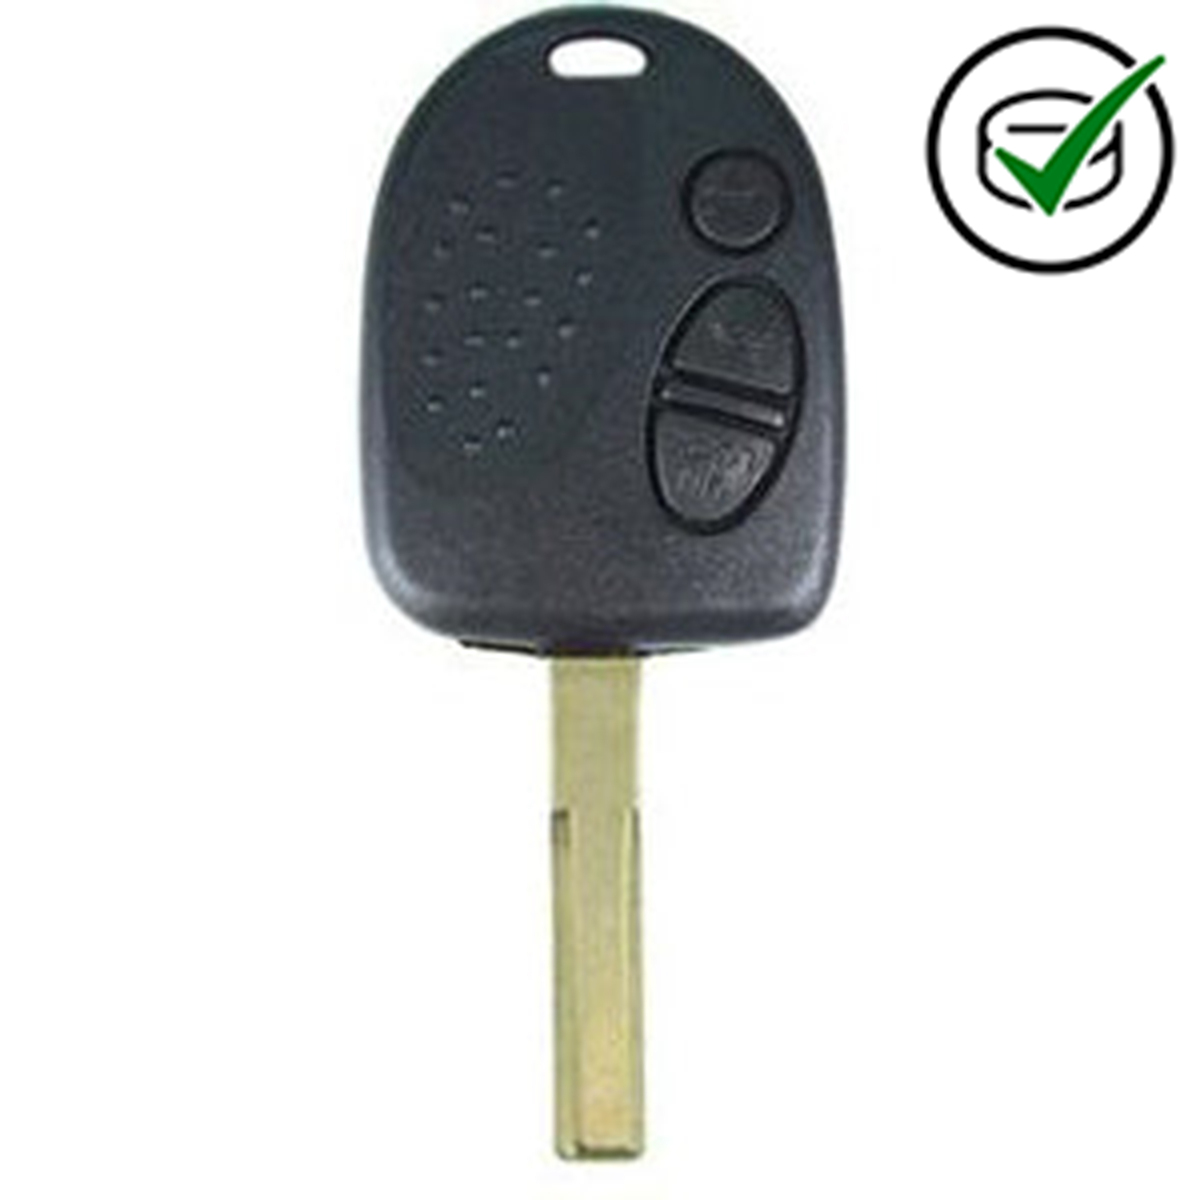 Holden 3 button remote with Blade and screws 304MHz